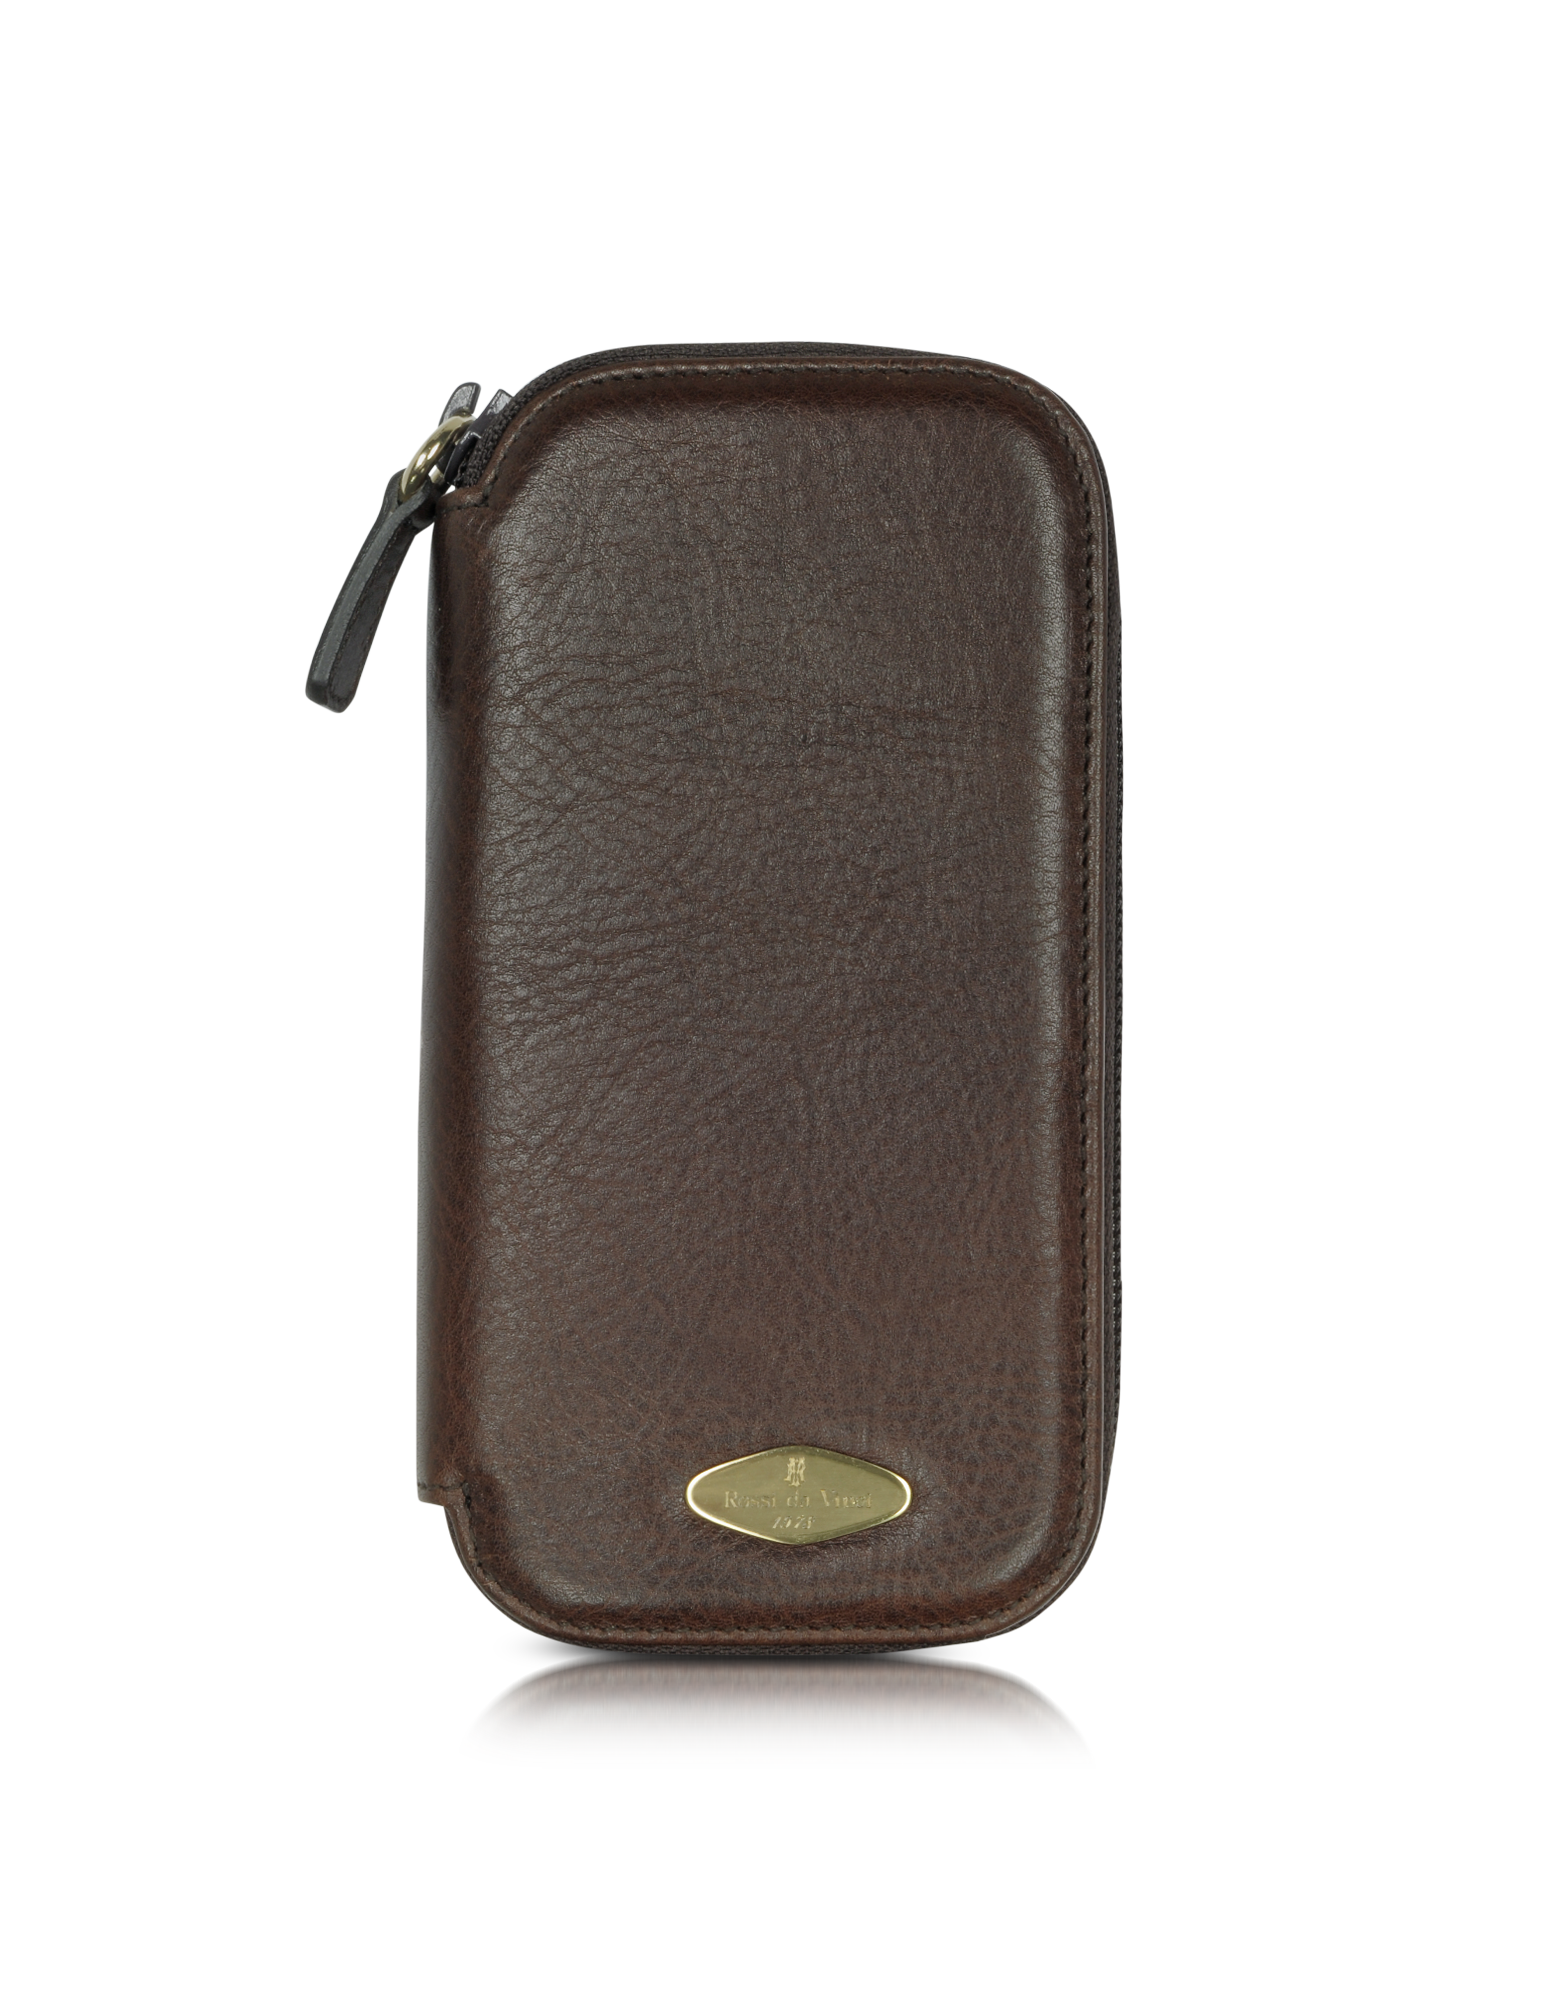 

Brown Leather Watch Box with Zipper